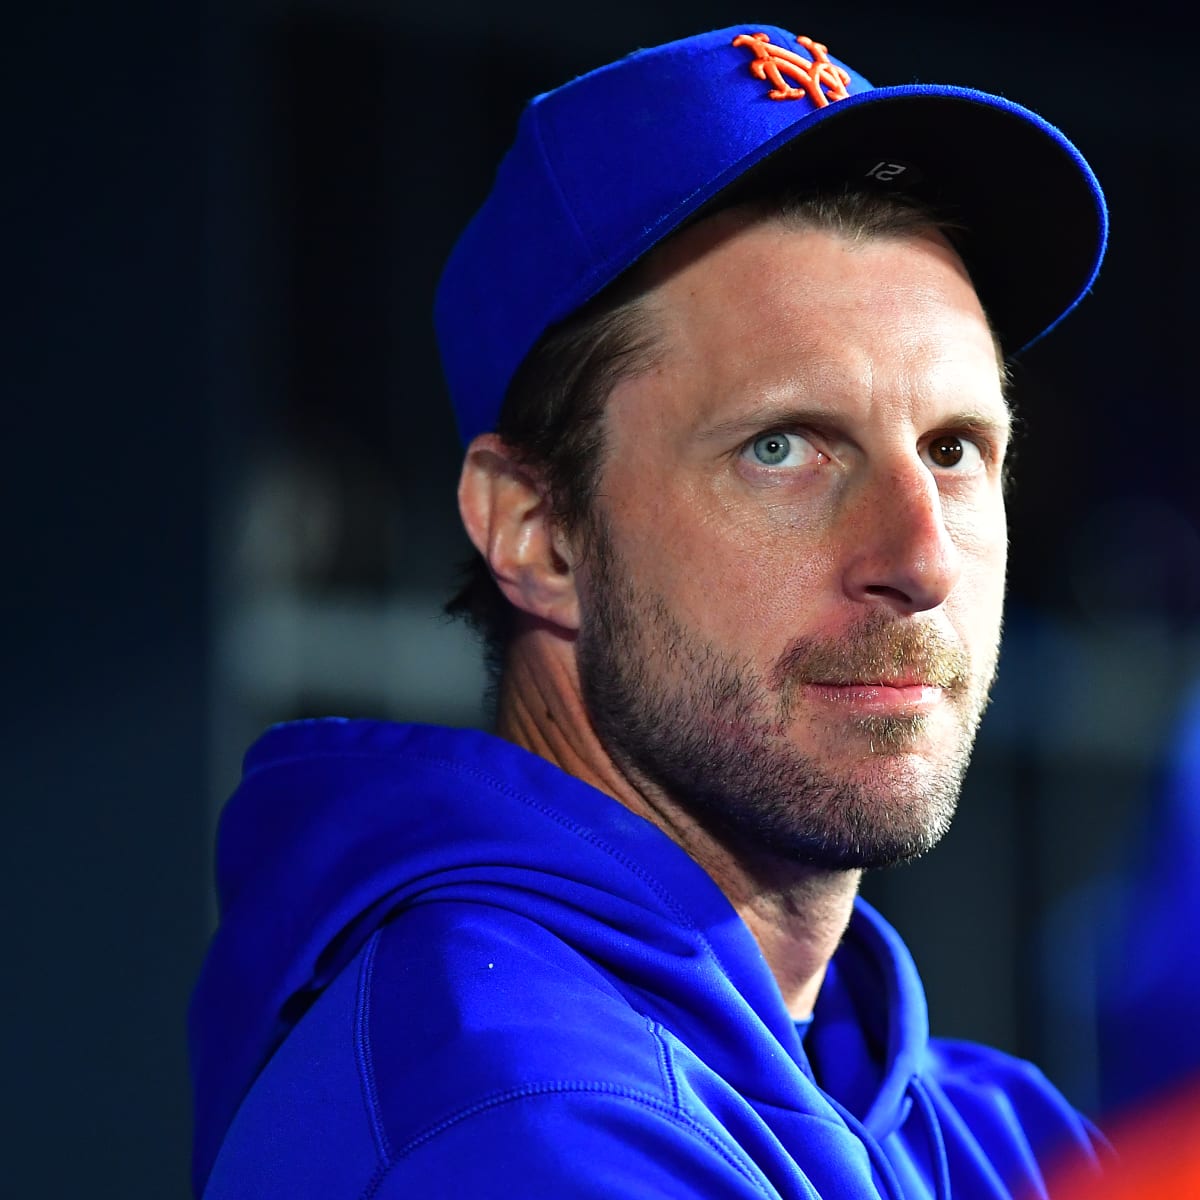 PHOTOS: Mets ace Scherzer pitches to sold-out crowd at Dunkin